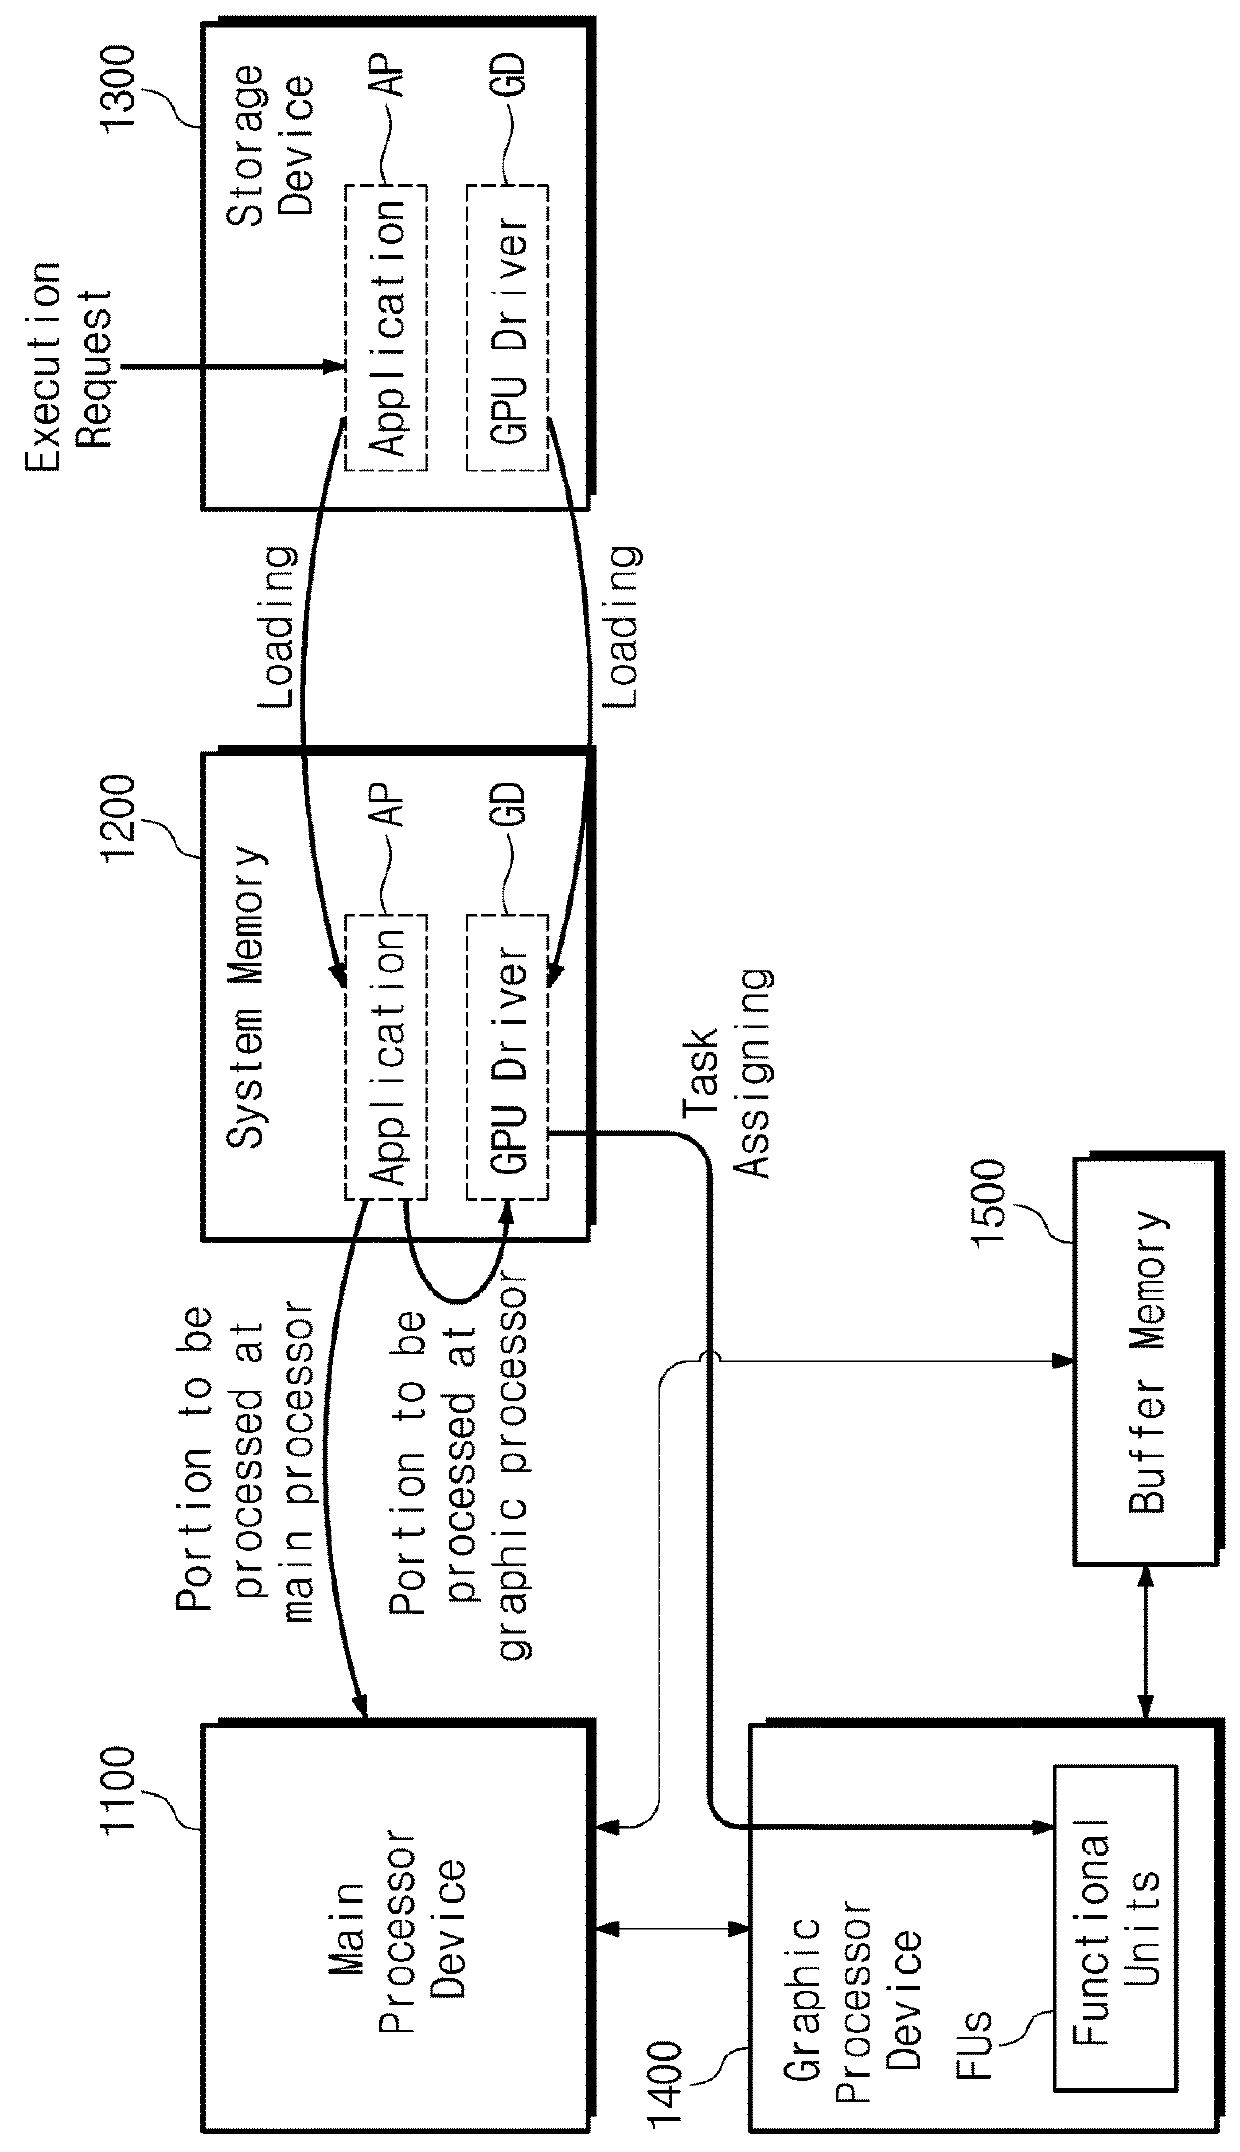 Processor device collecting performance information through command-set-based replay